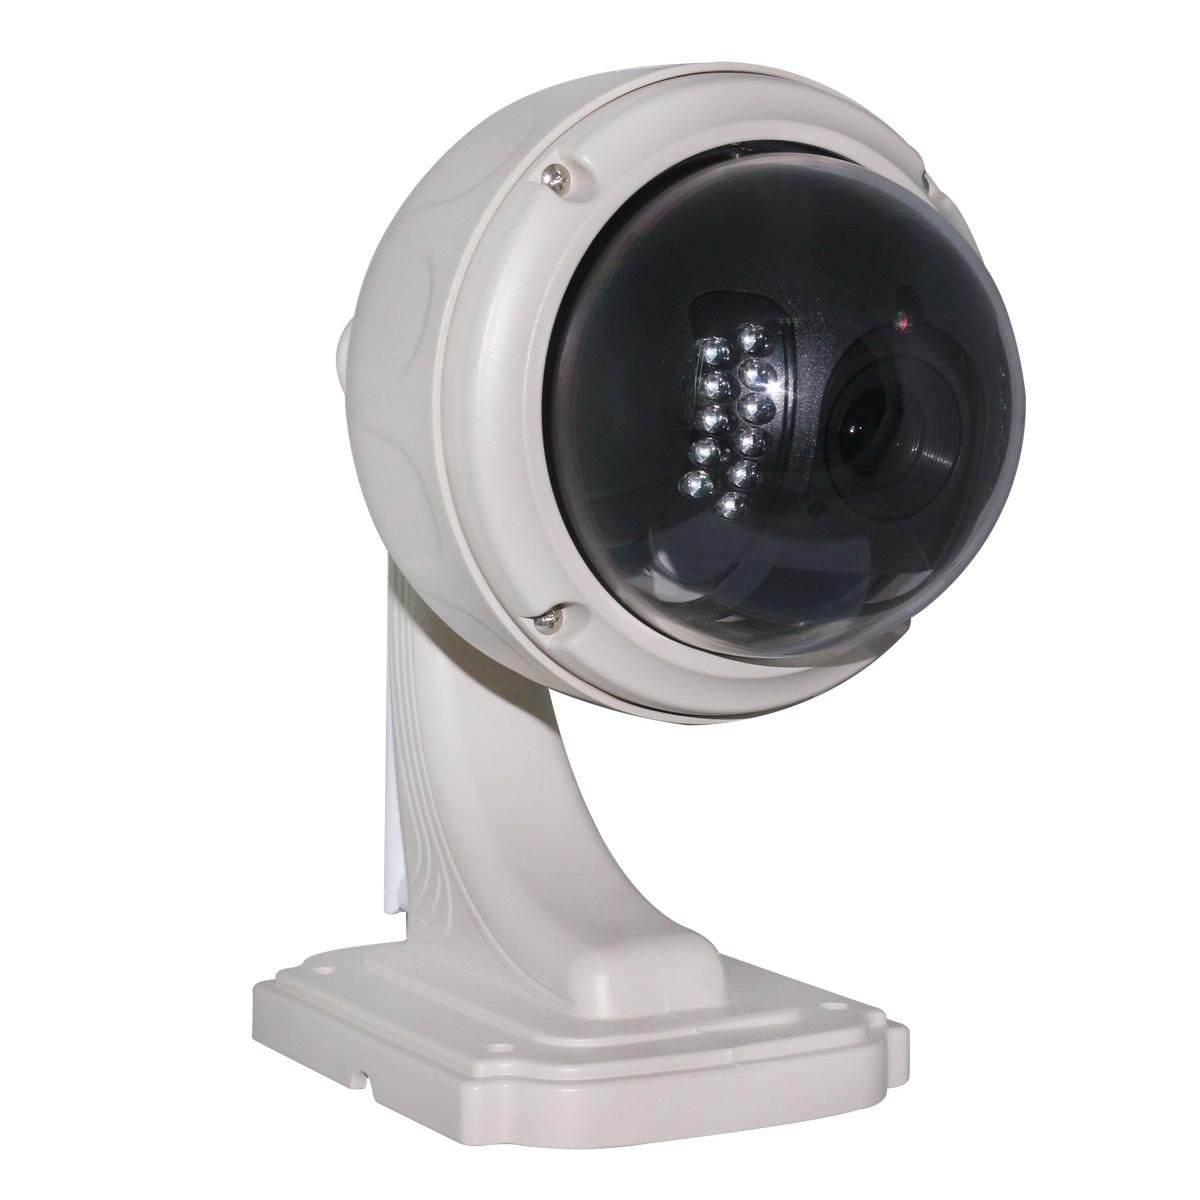 Home Surveillance 1MP HD PTZ Zoom Outdoor Dome H.264 Mobile View IP Camera 5